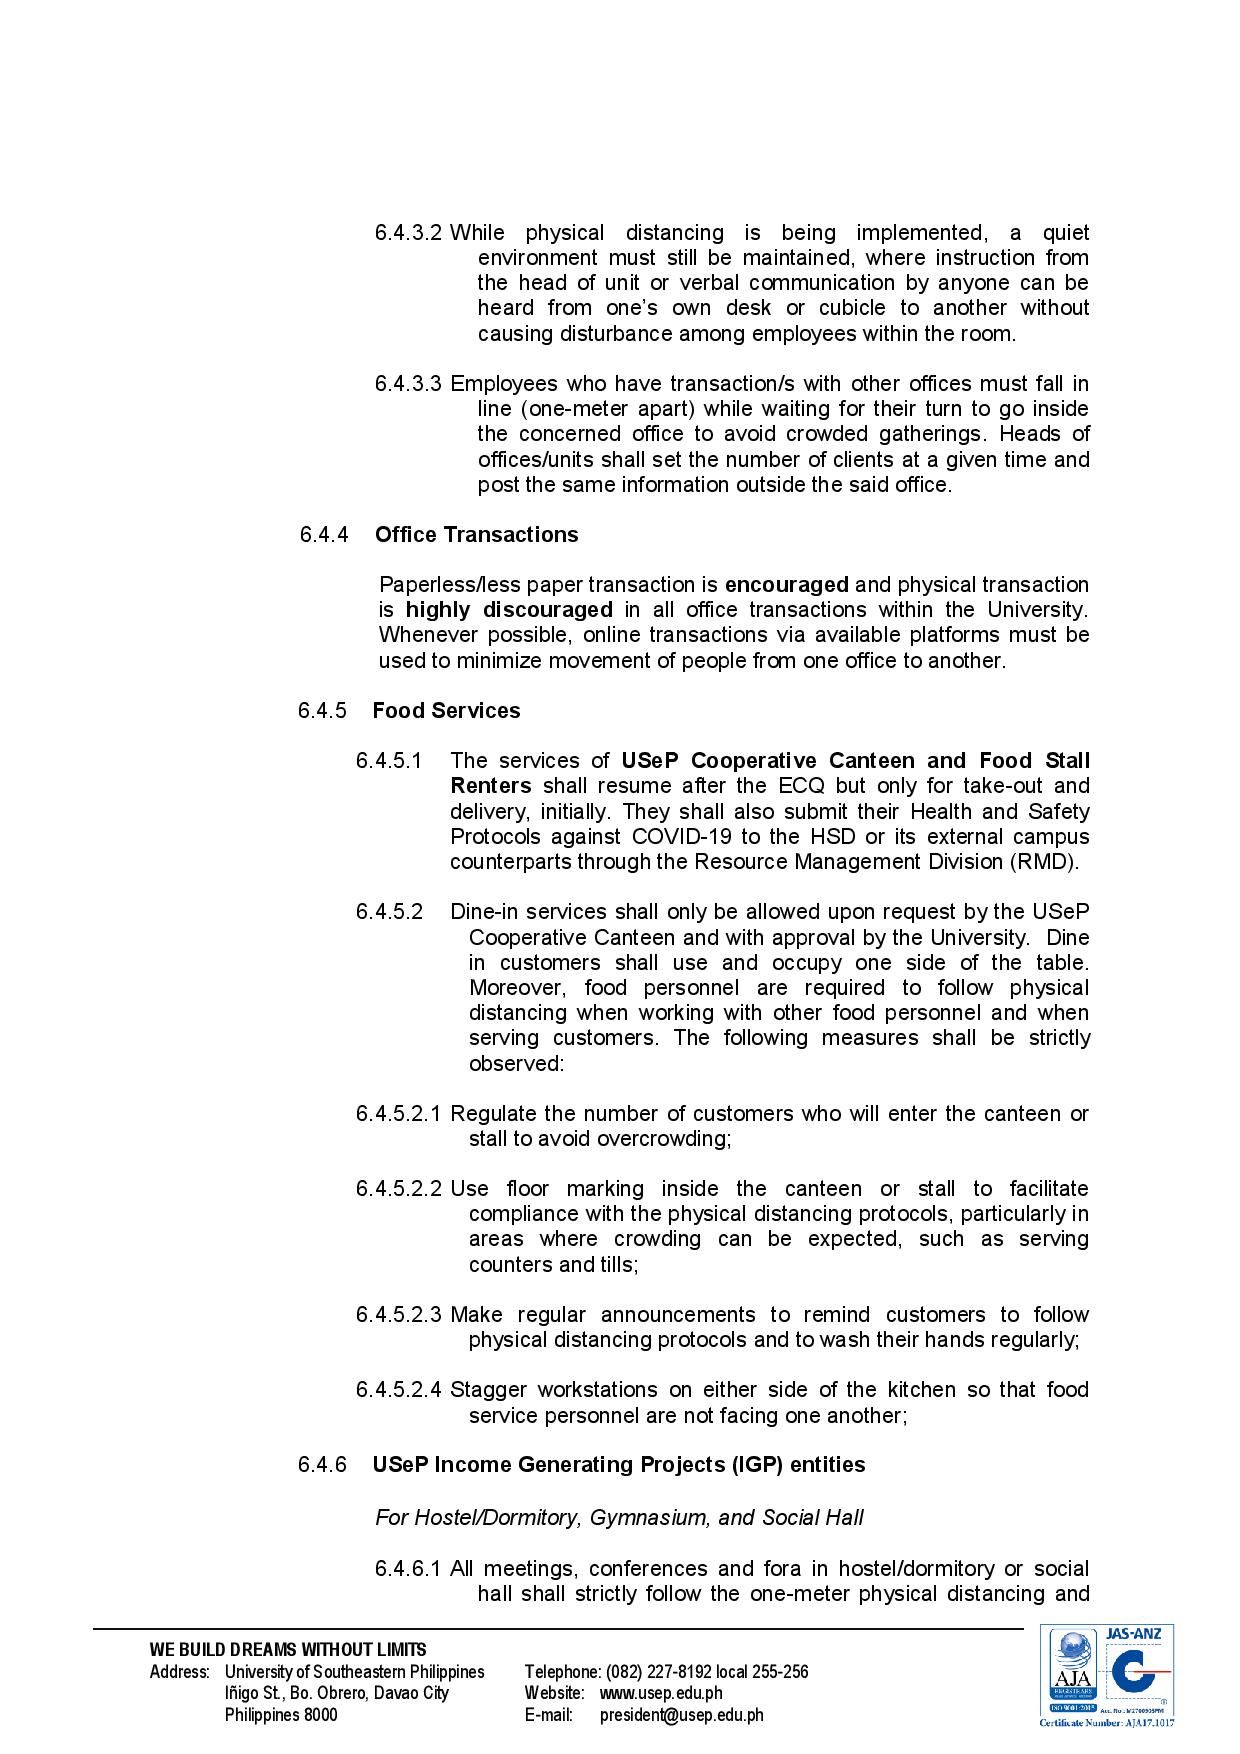 mc-03-s-2020-memorandum-circular-on-administrative-guidelines-upon-resumption-of-work-and-conduct-of-classes-under-the-new-normal-condition-1-page-007